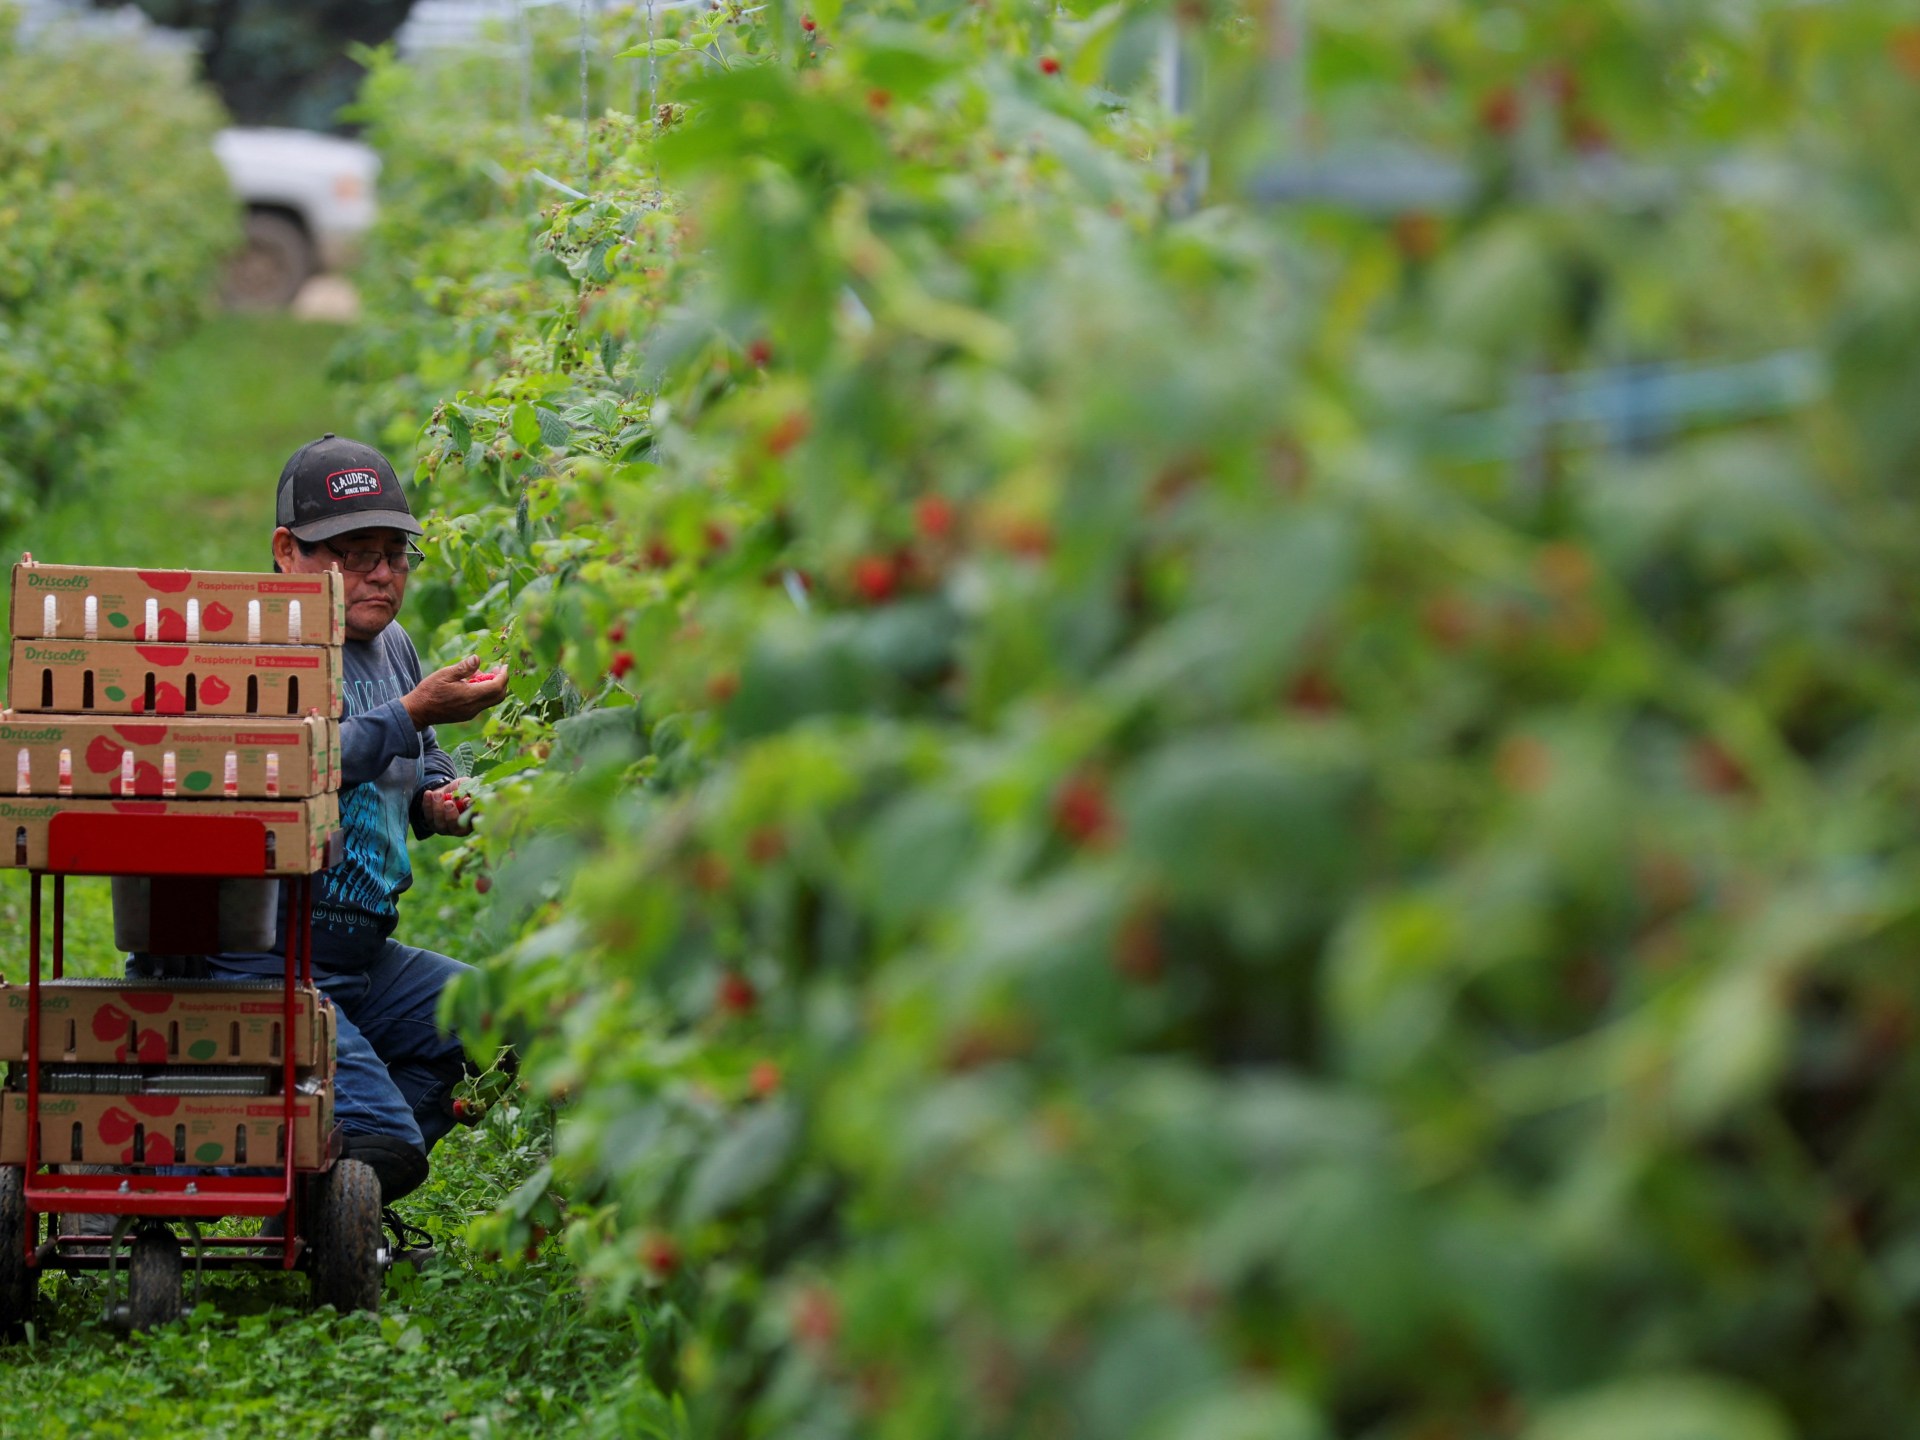 ‘Overtly racist’: Lawsuit challenges Canada’s migrant farmworker system | Workers’ Rights News